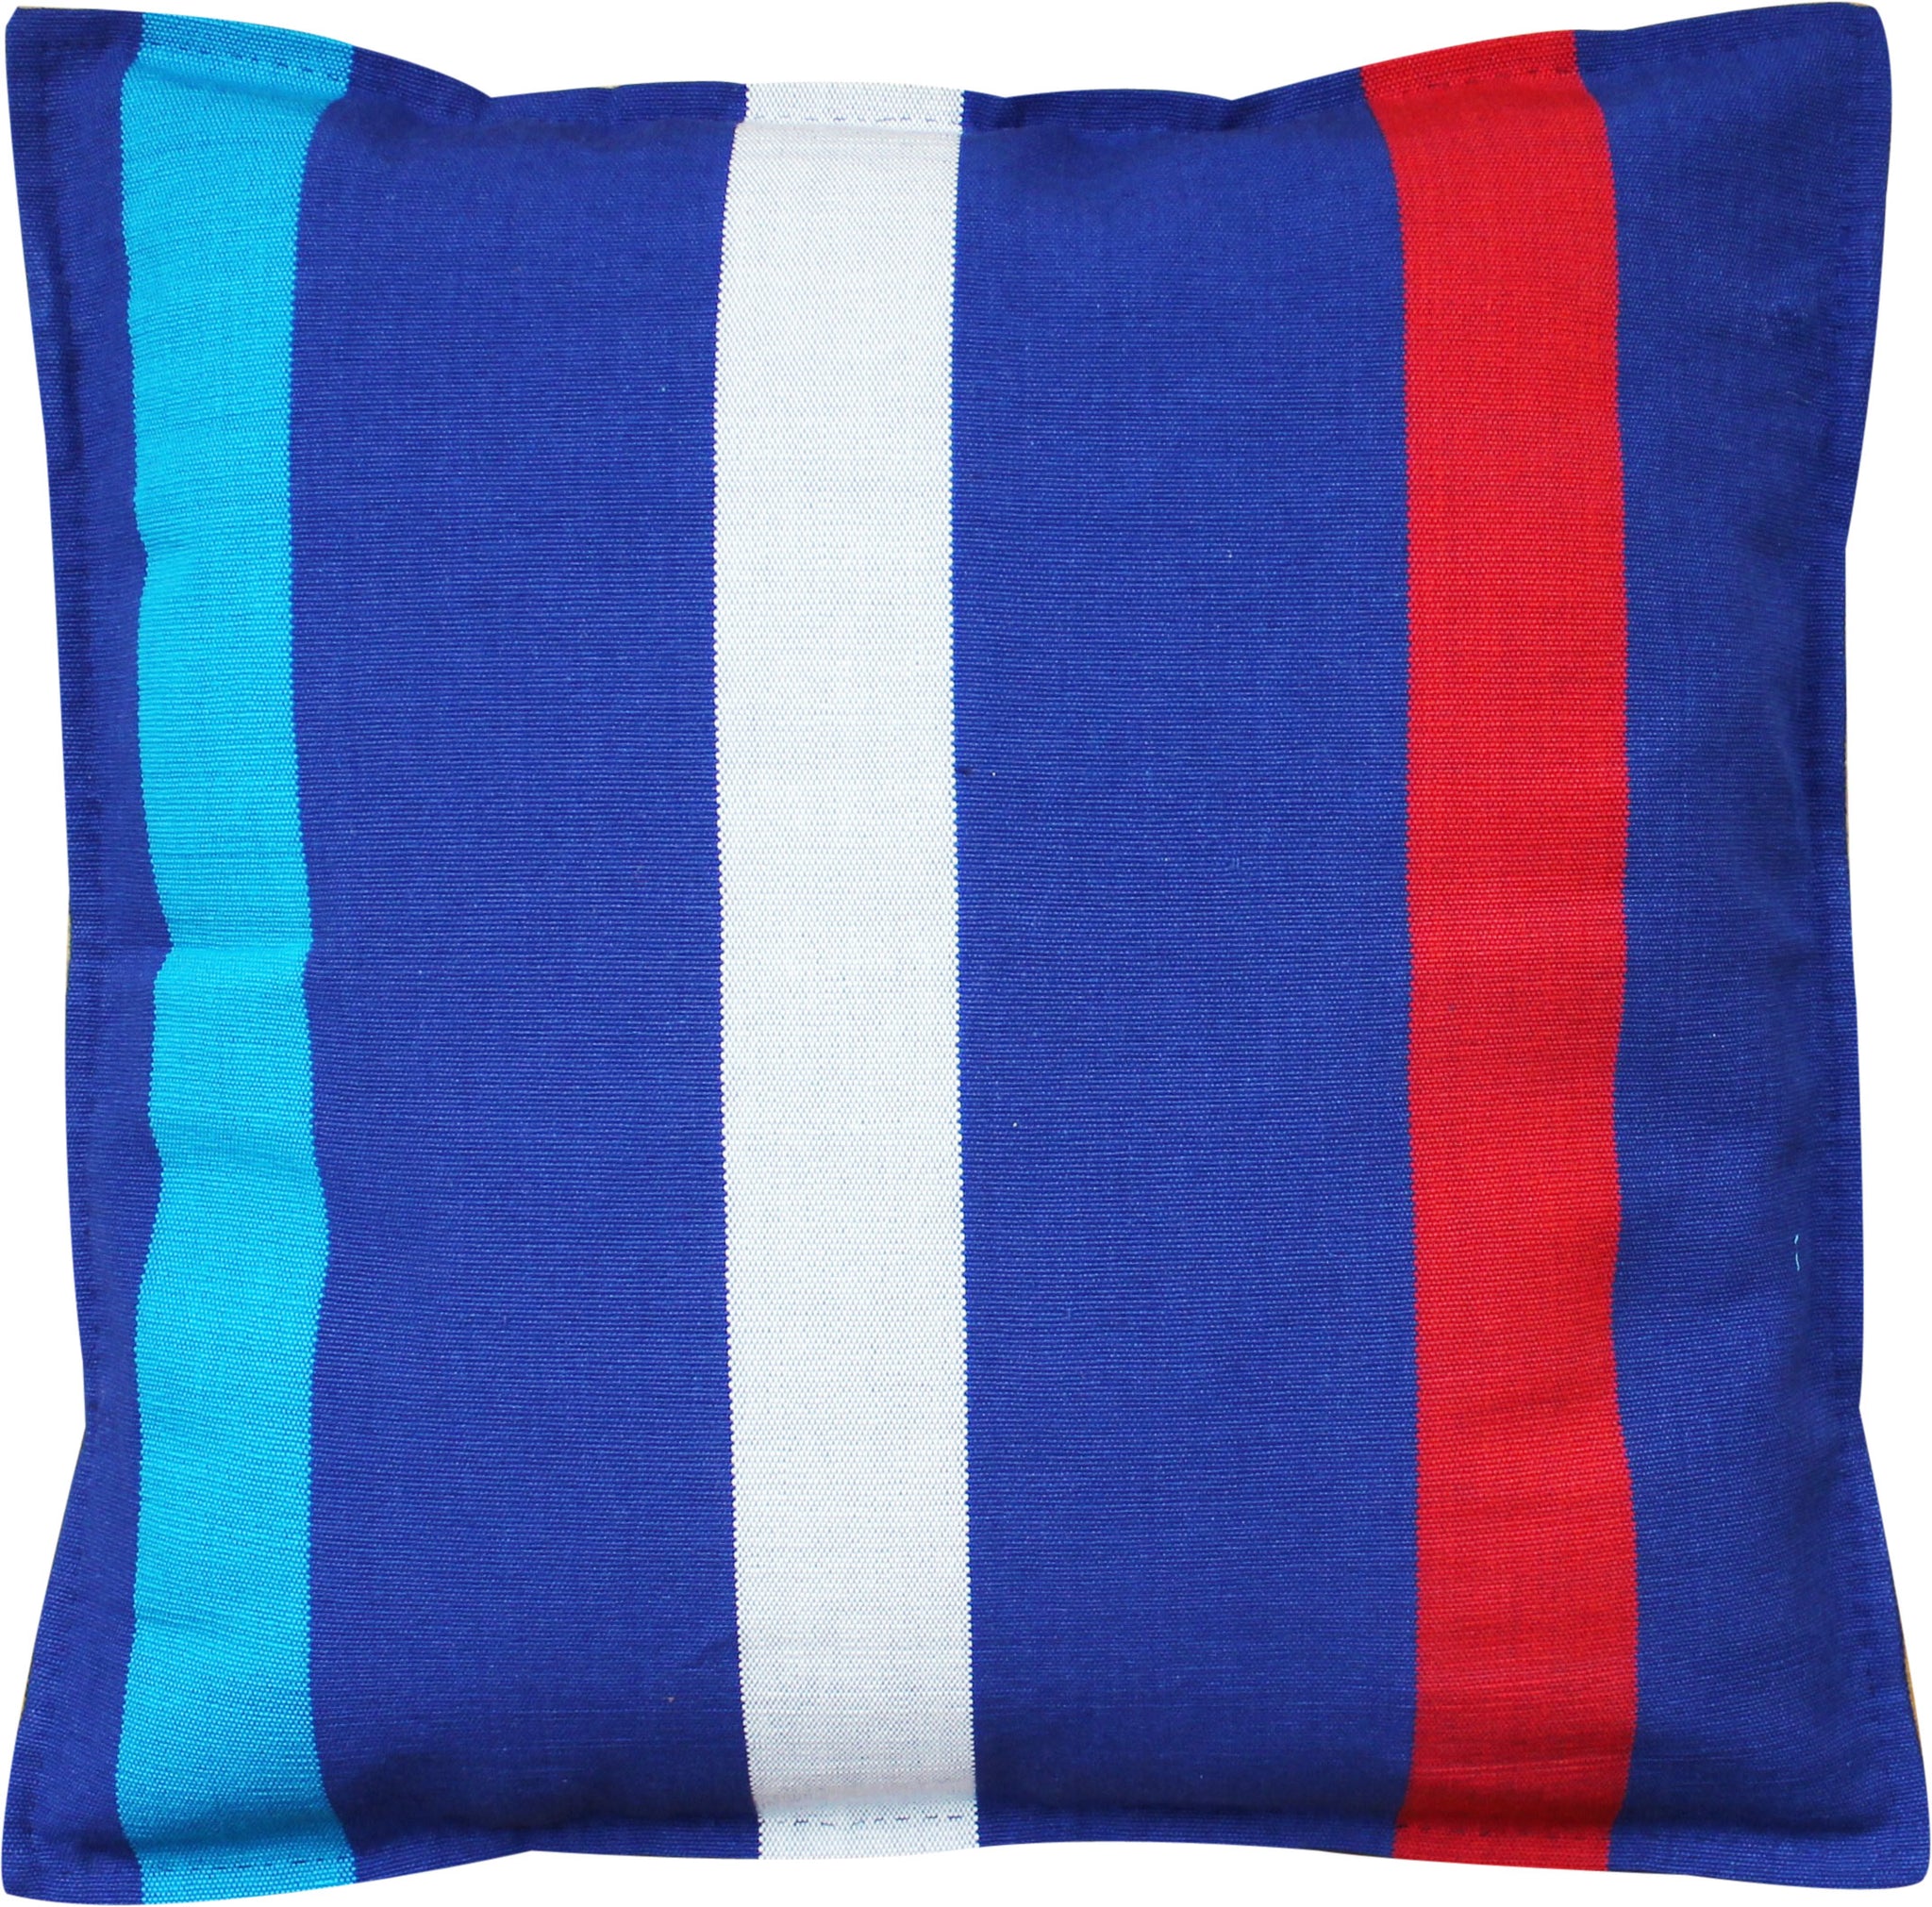 Barefoot handloom cushion cover - in the navy